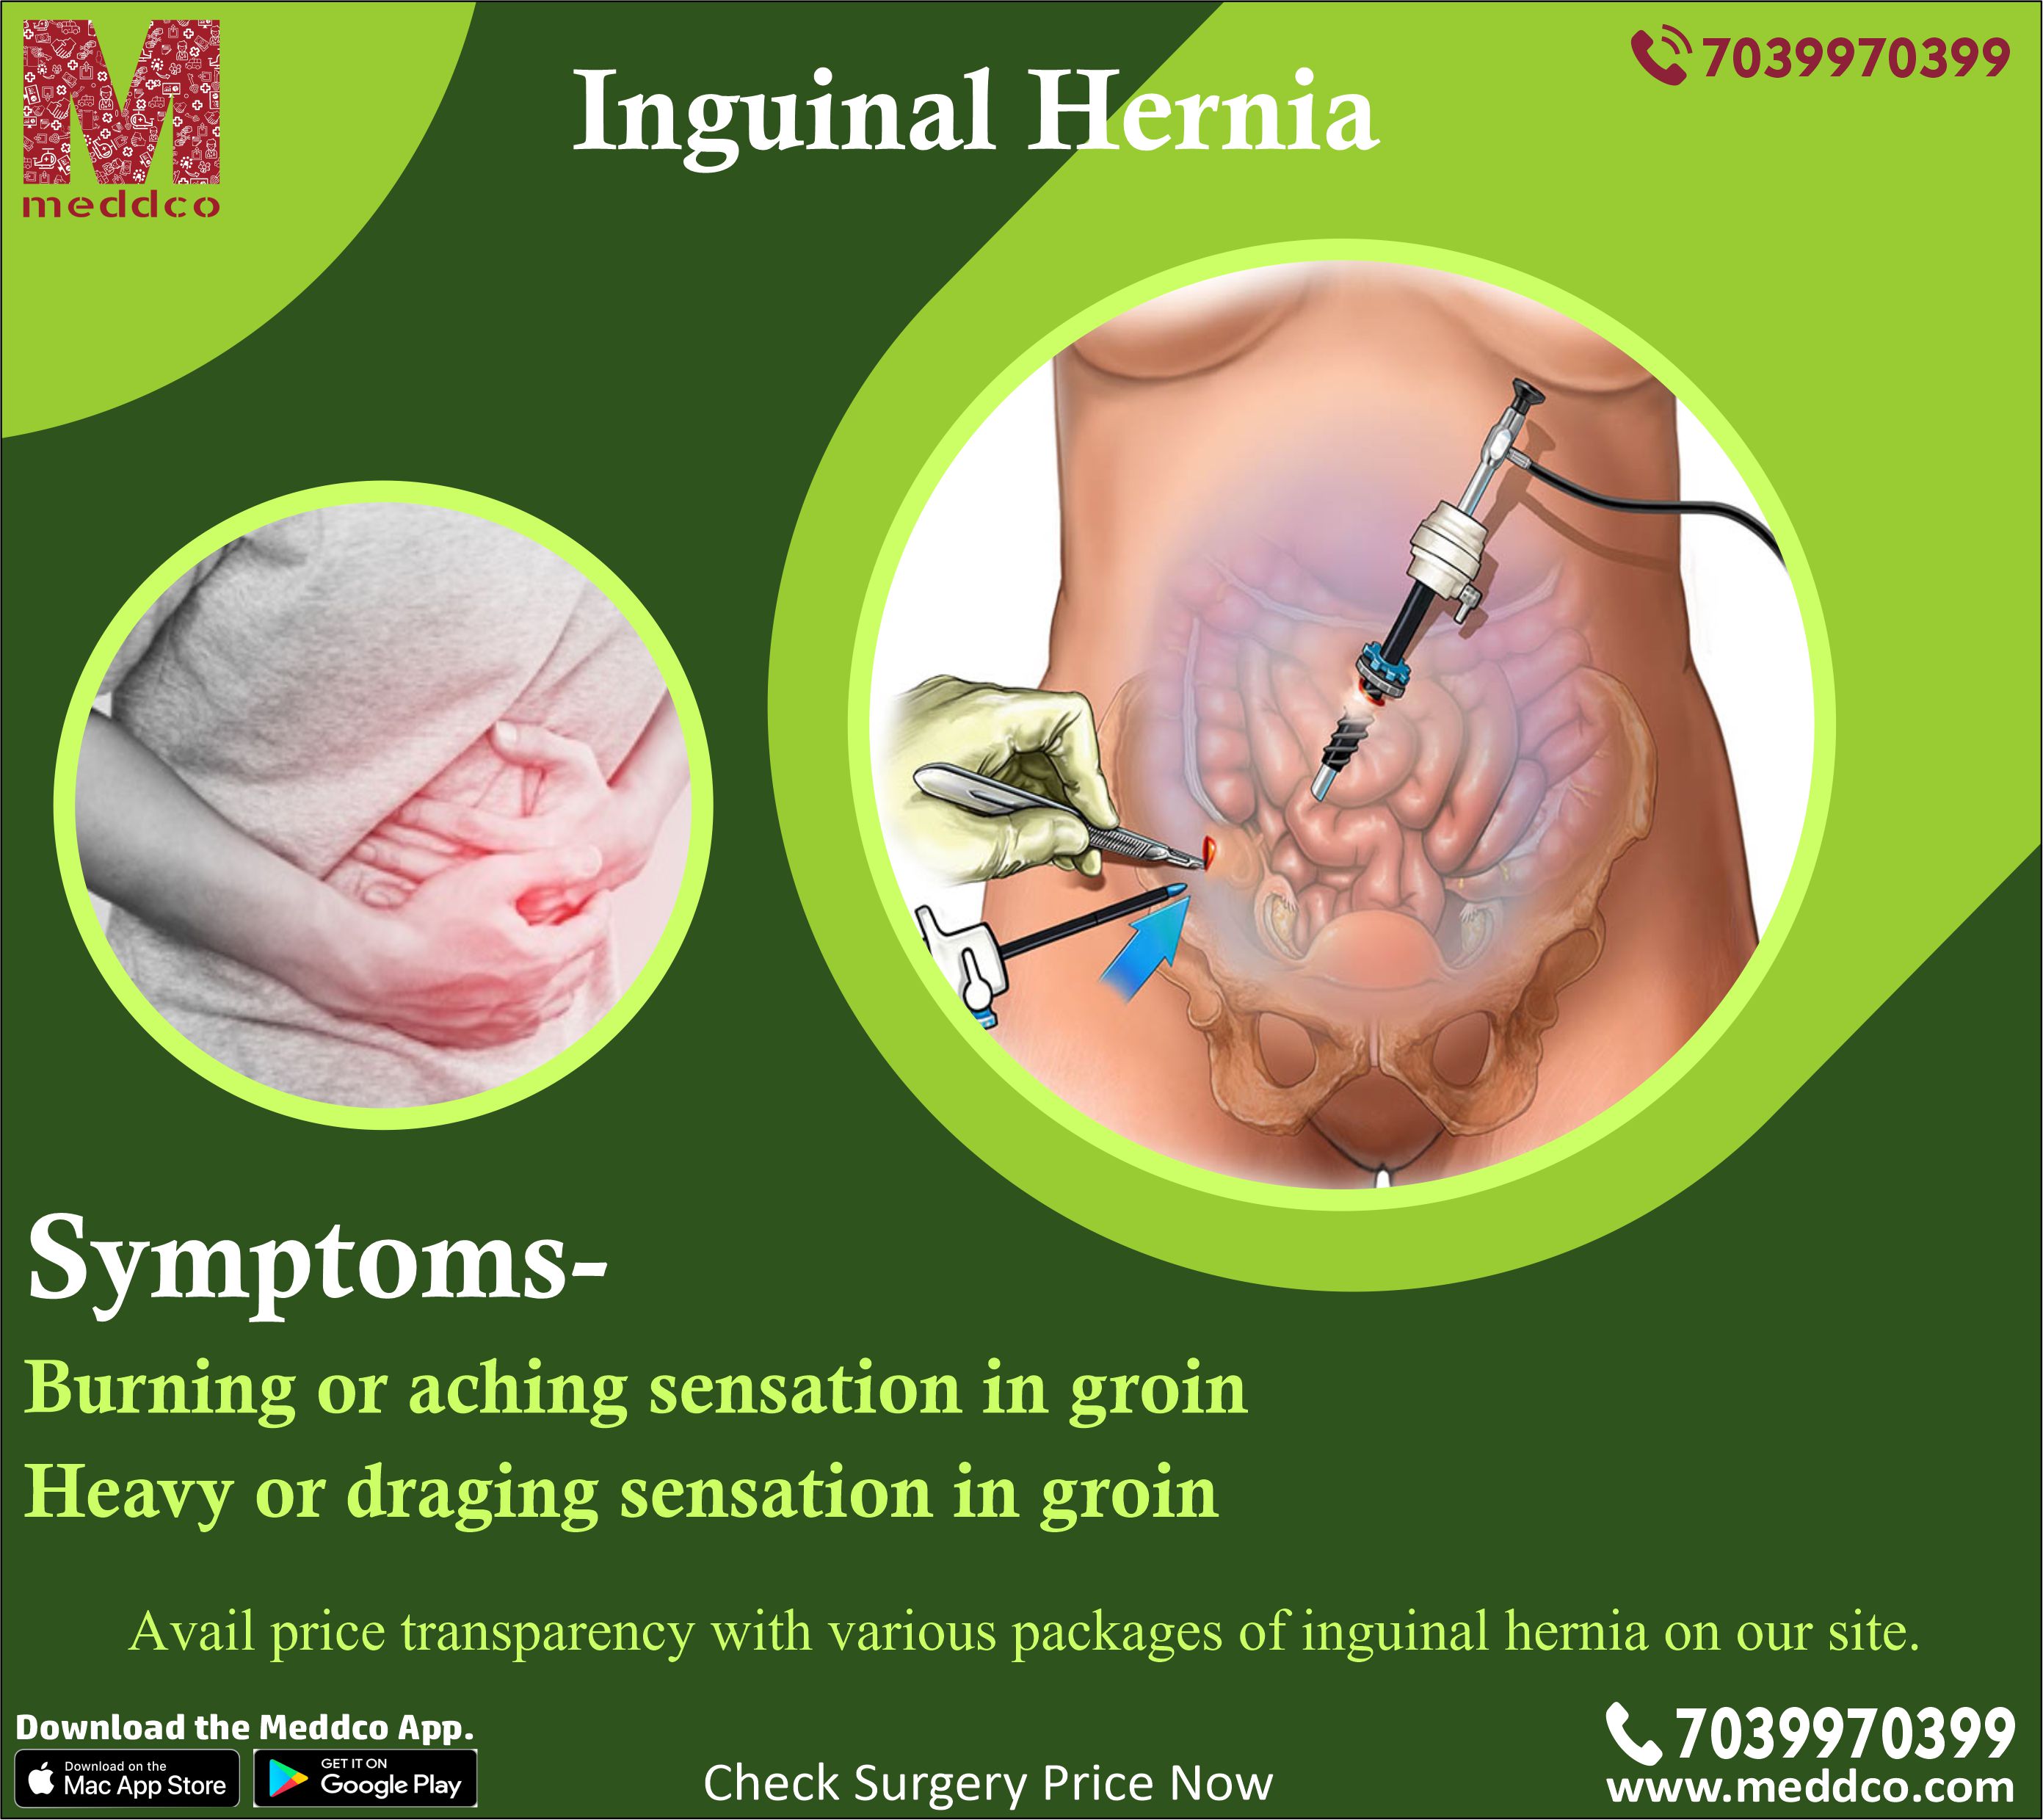 Inguinal Hernia - All you need to know!